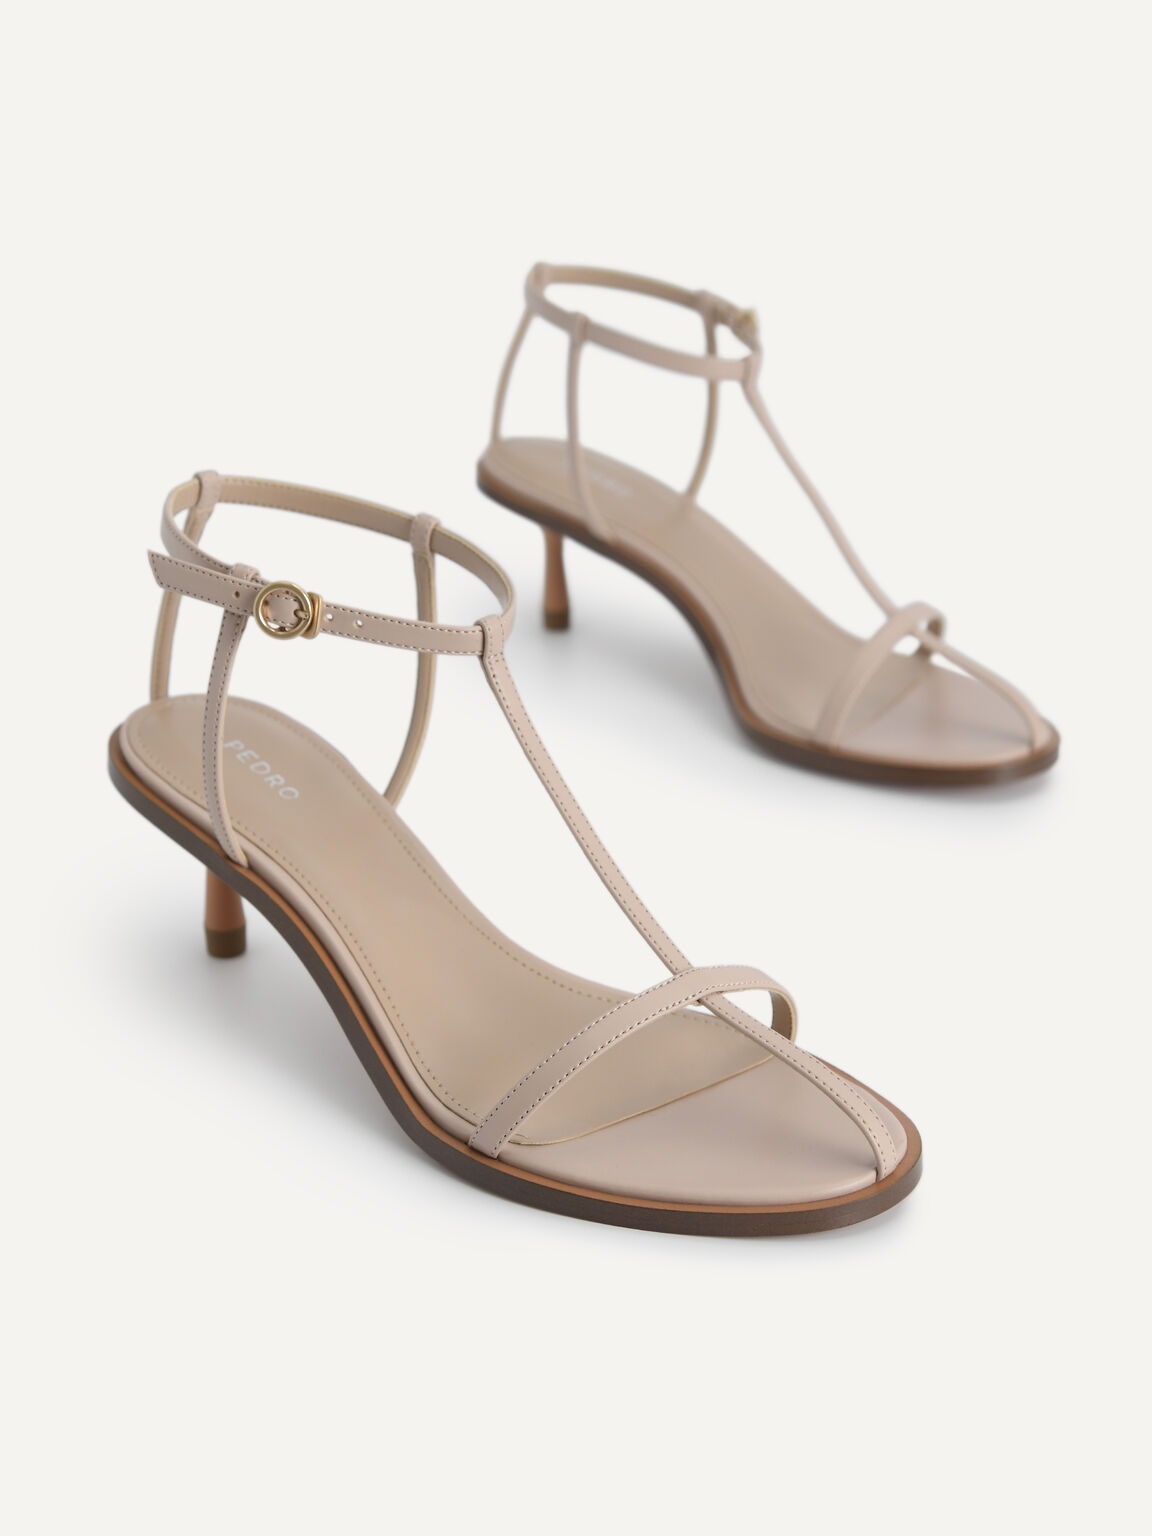 Ankle-Strap Heeled Sandals, Nude